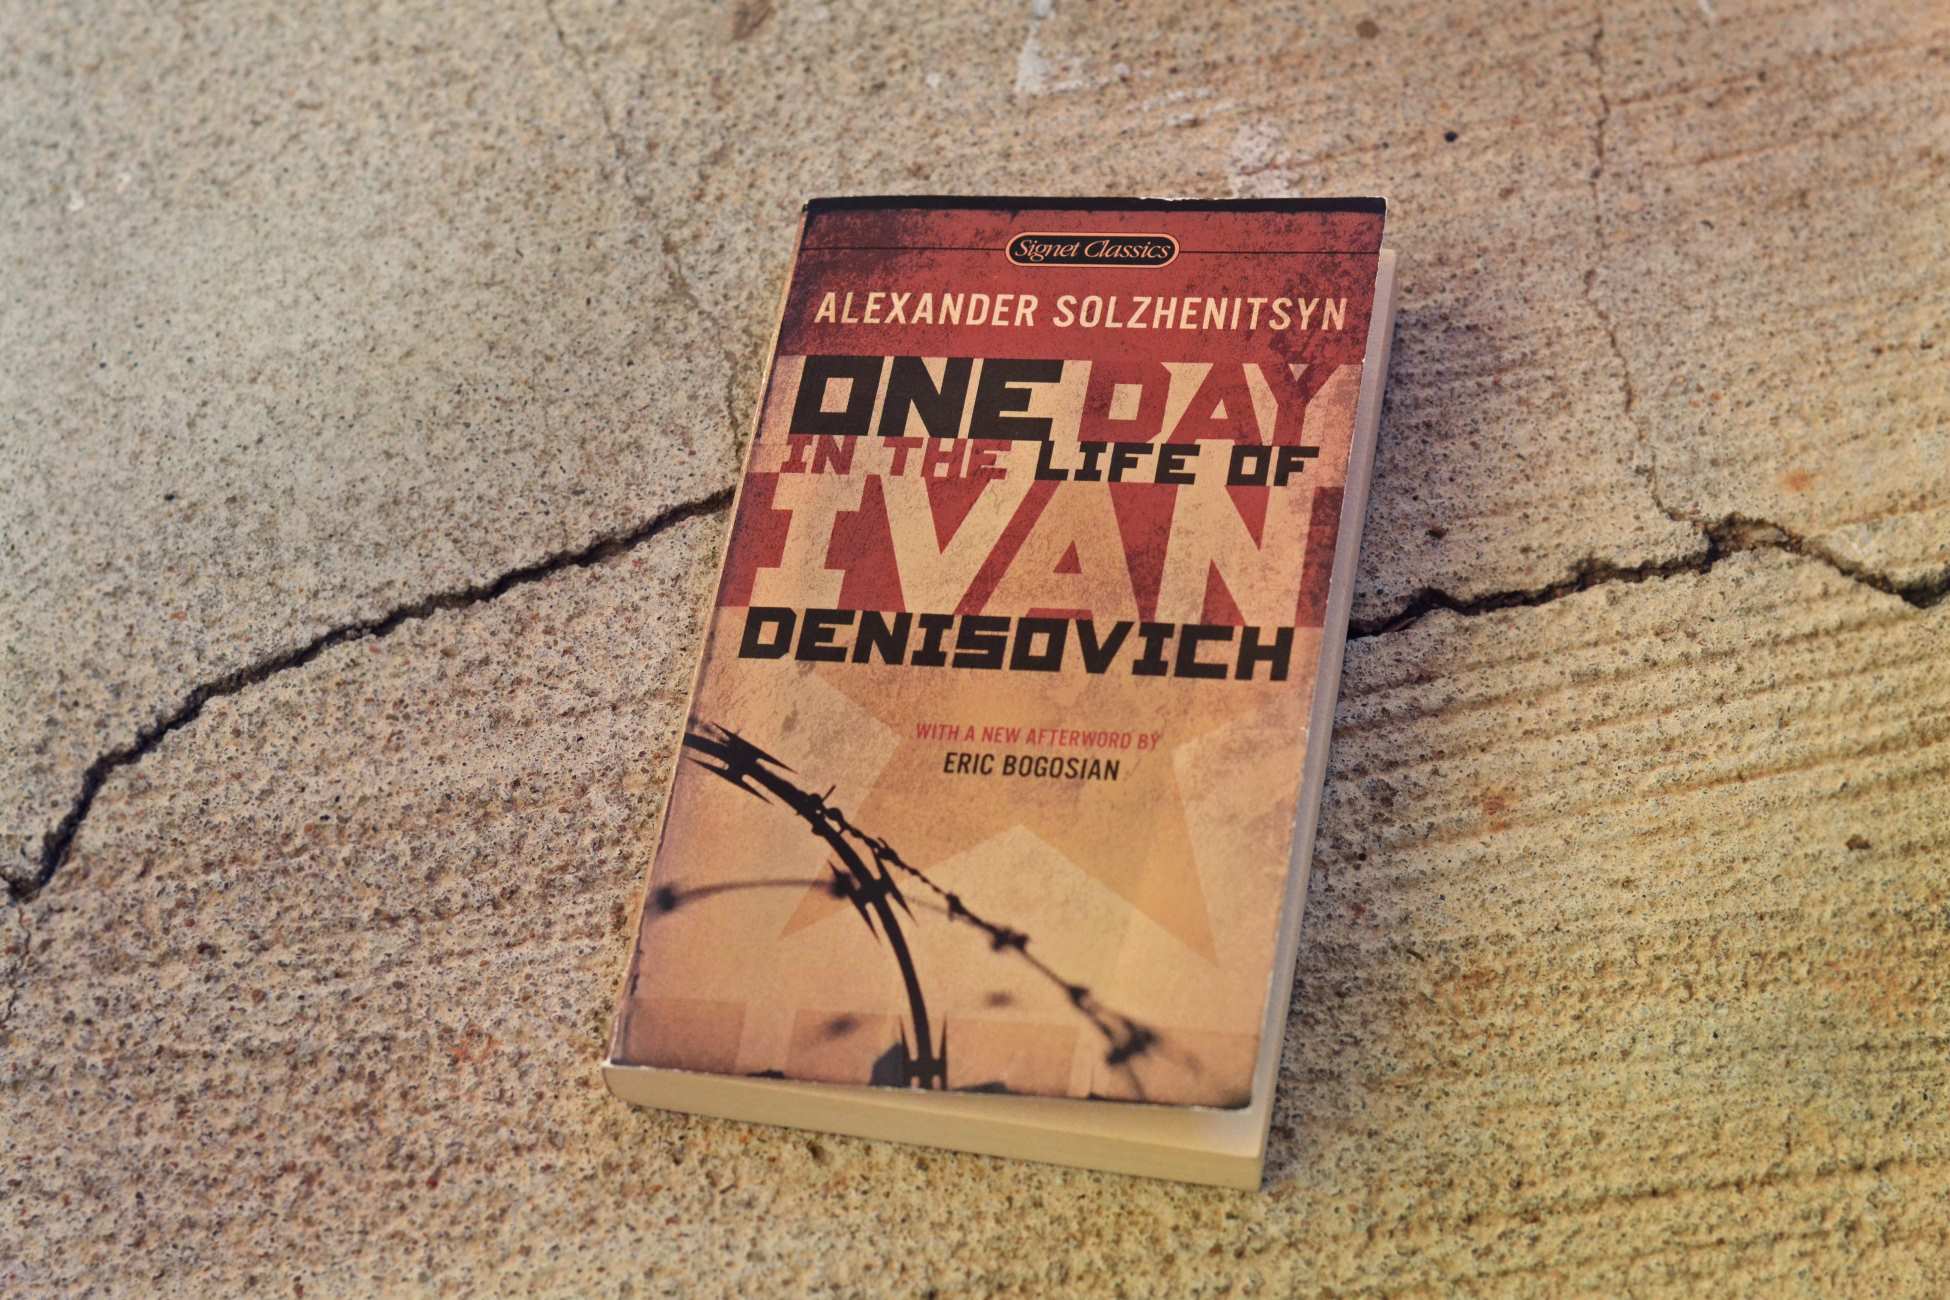 18-mind-blowing-facts-about-one-day-in-the-life-of-ivan-denisovich-aleksandr-solzhenitsyn